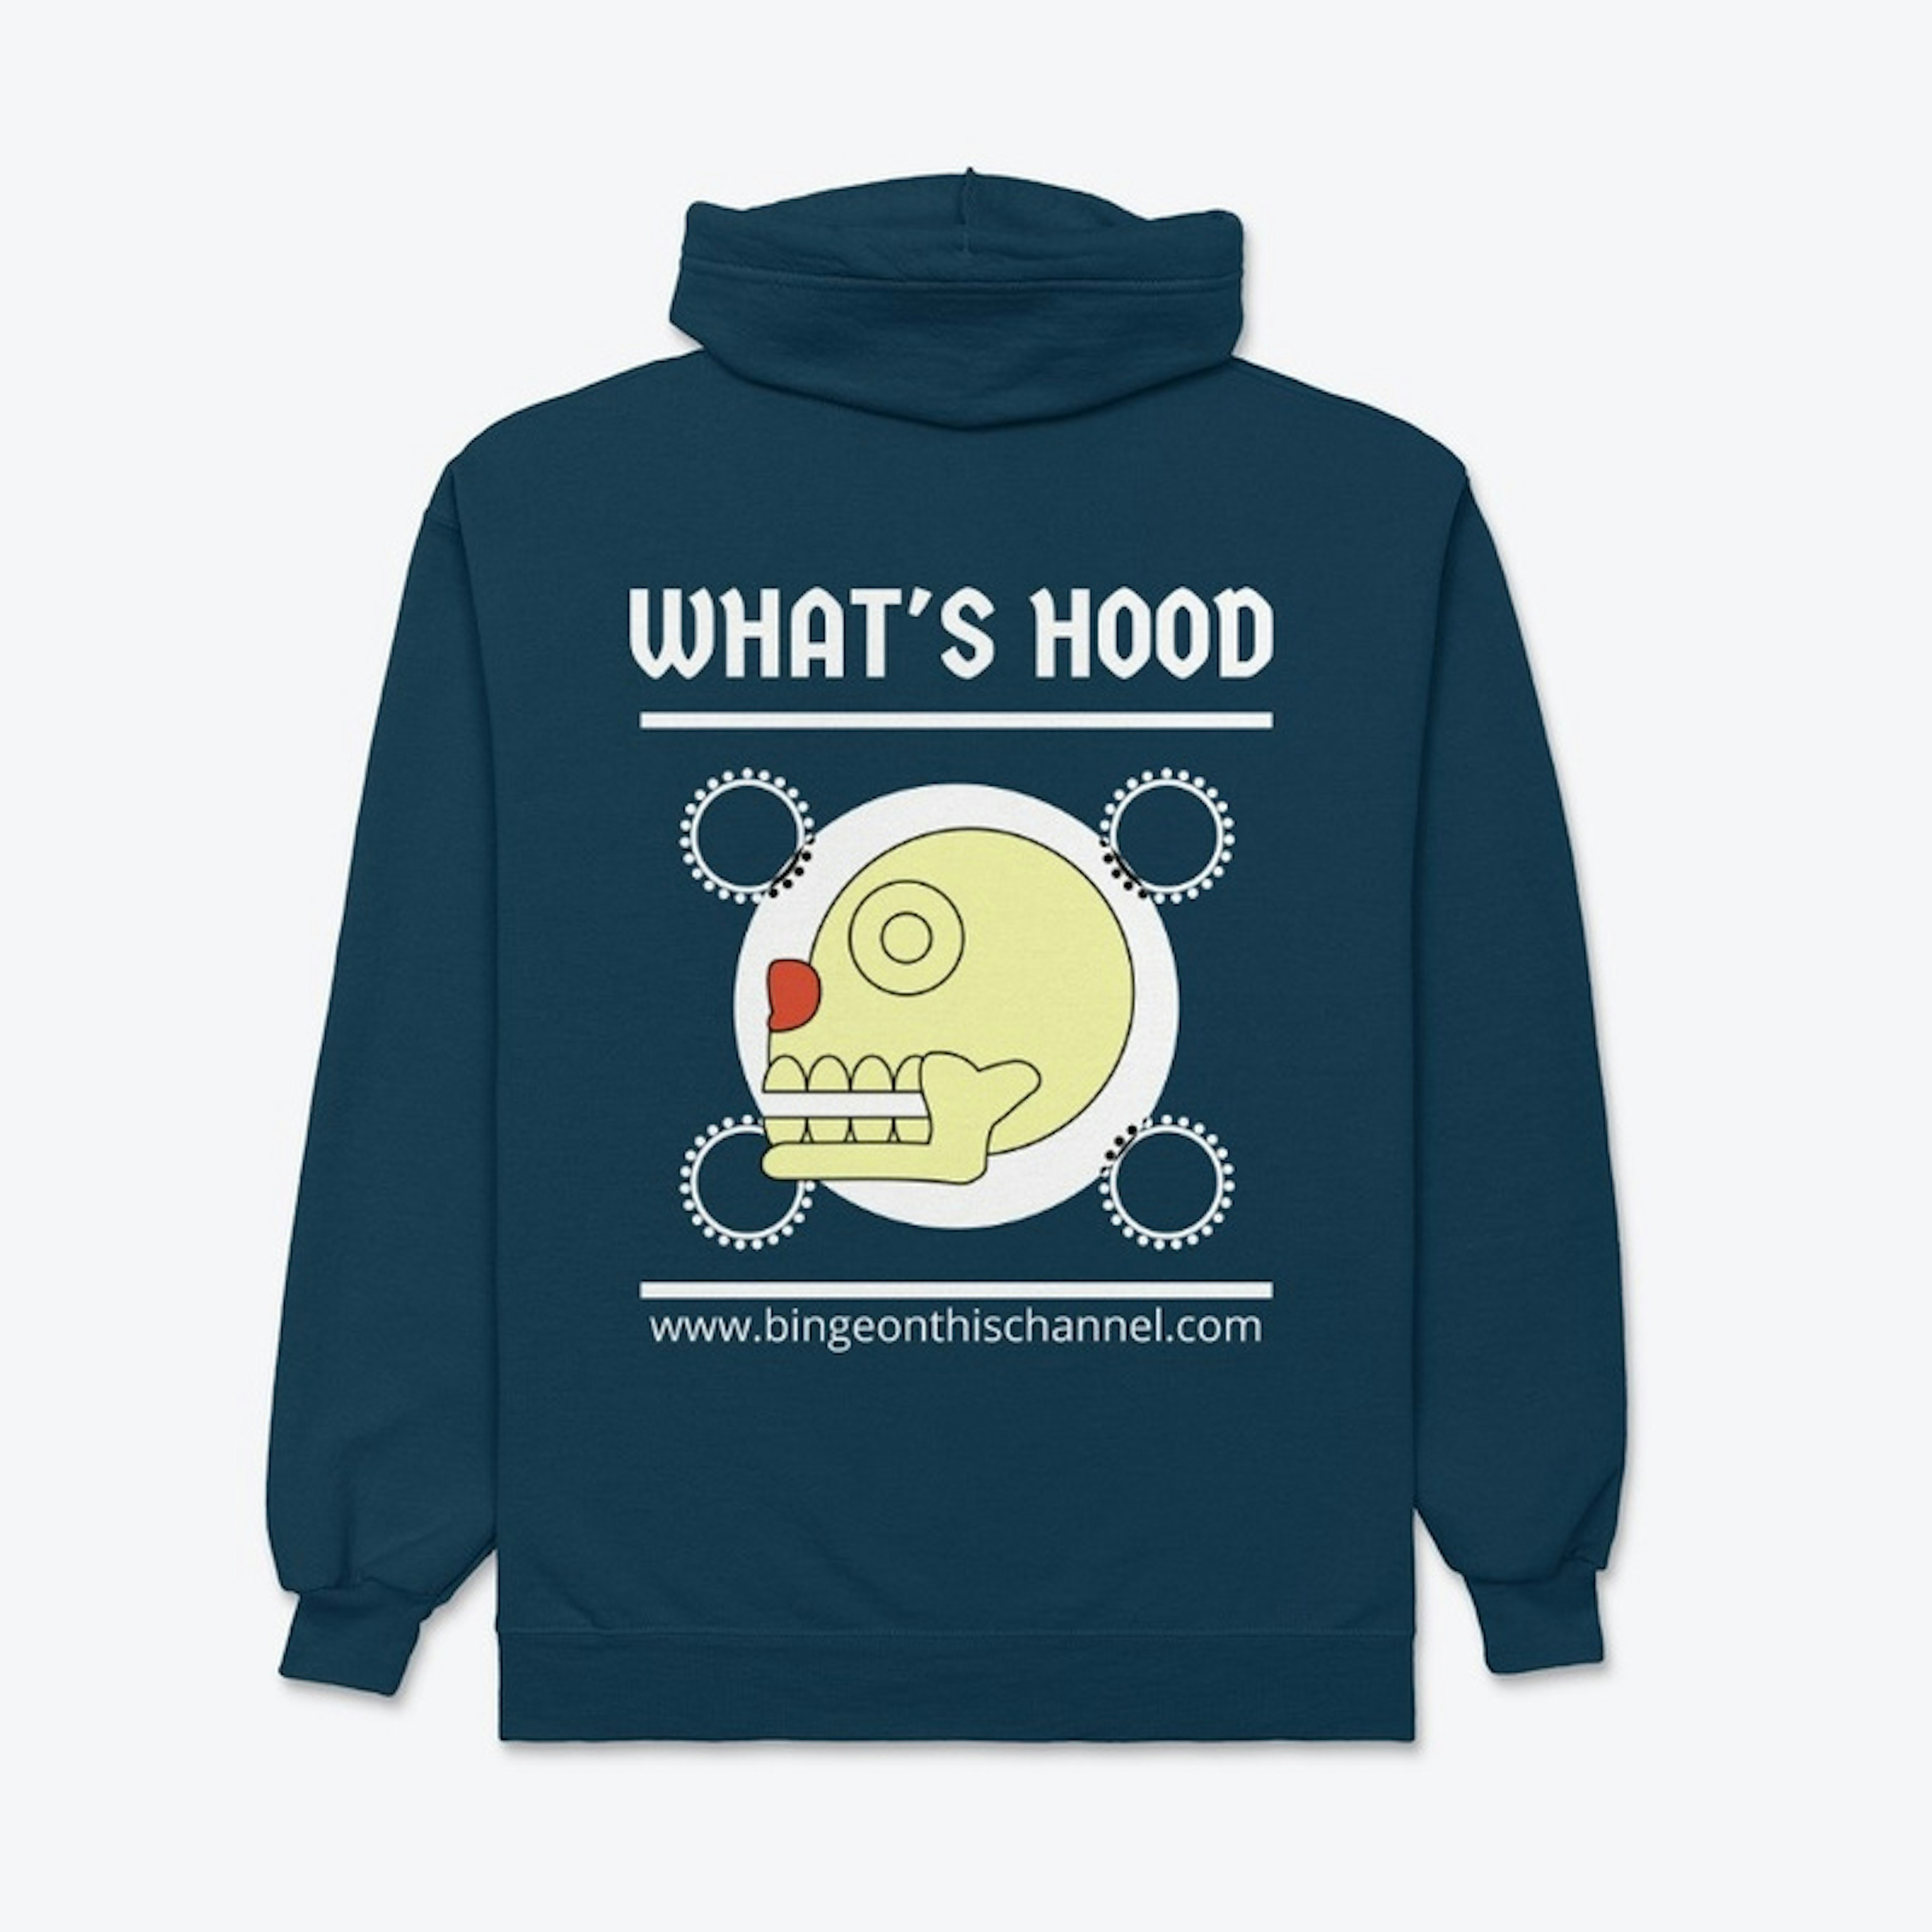 WHAT'S HOOD PODCAST